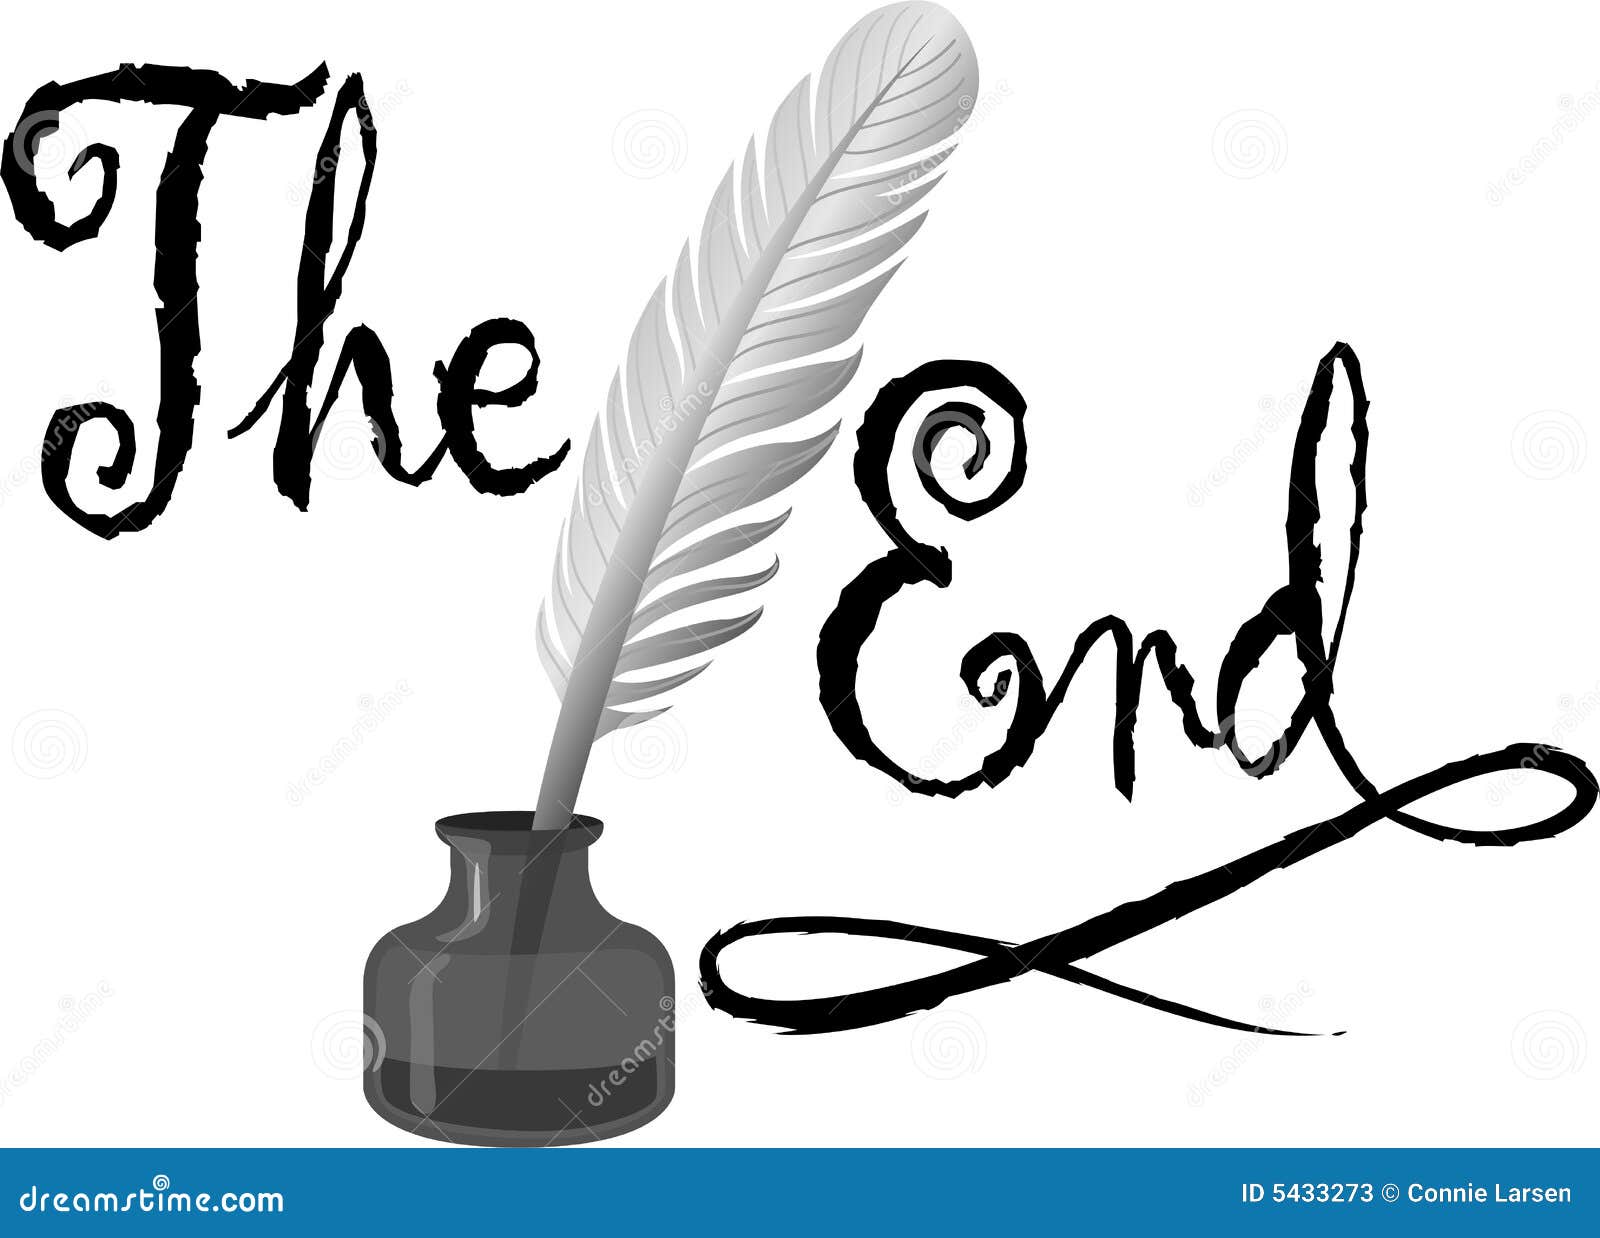 quill and ink the end